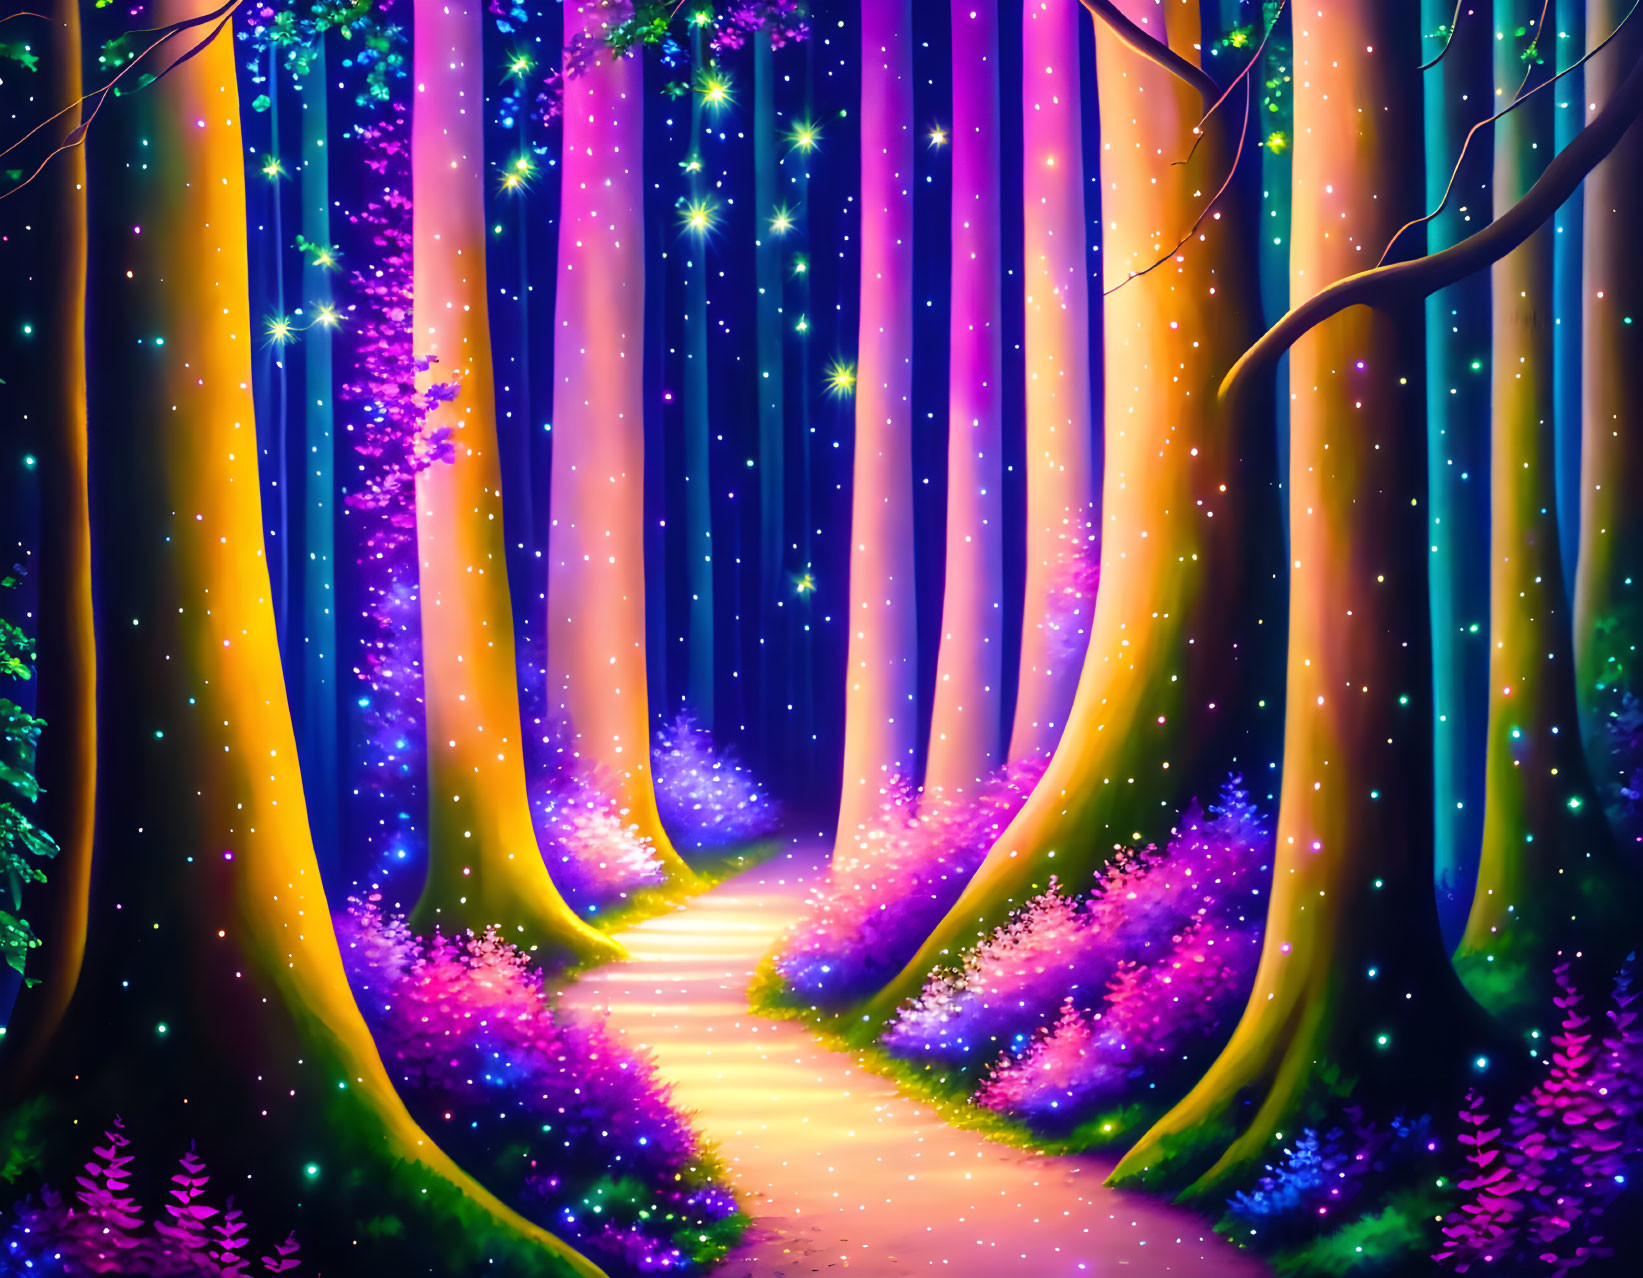 Enchanting forest path with multicolored glowing trees at night